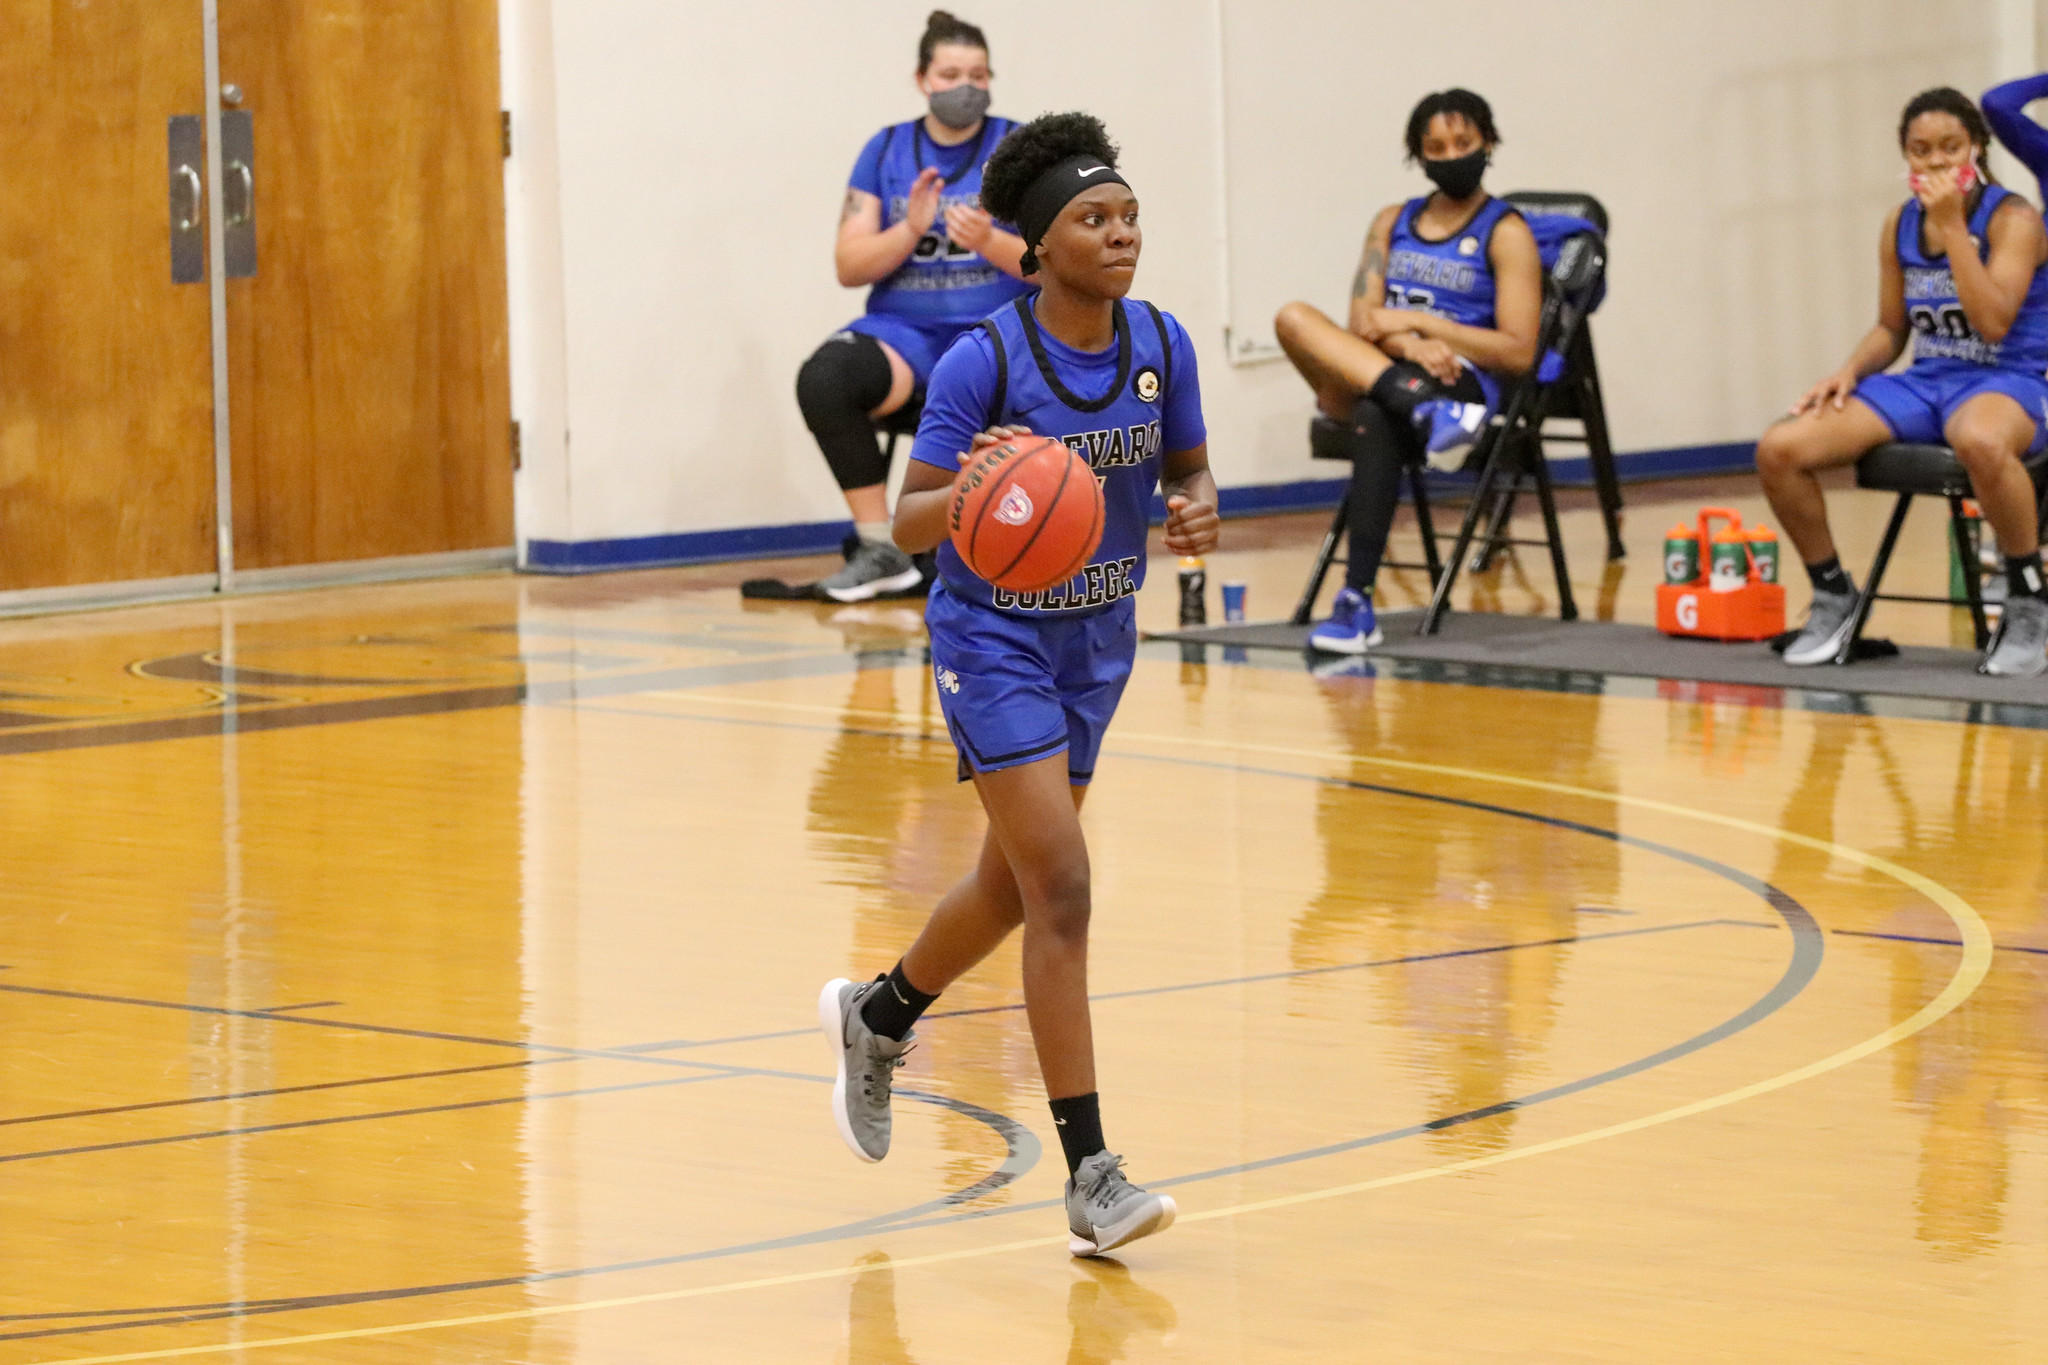 Chyna Pouncey totaled 10 points on 4-of-4 shooting (Photo courtesy of Victoria Brayman '22)